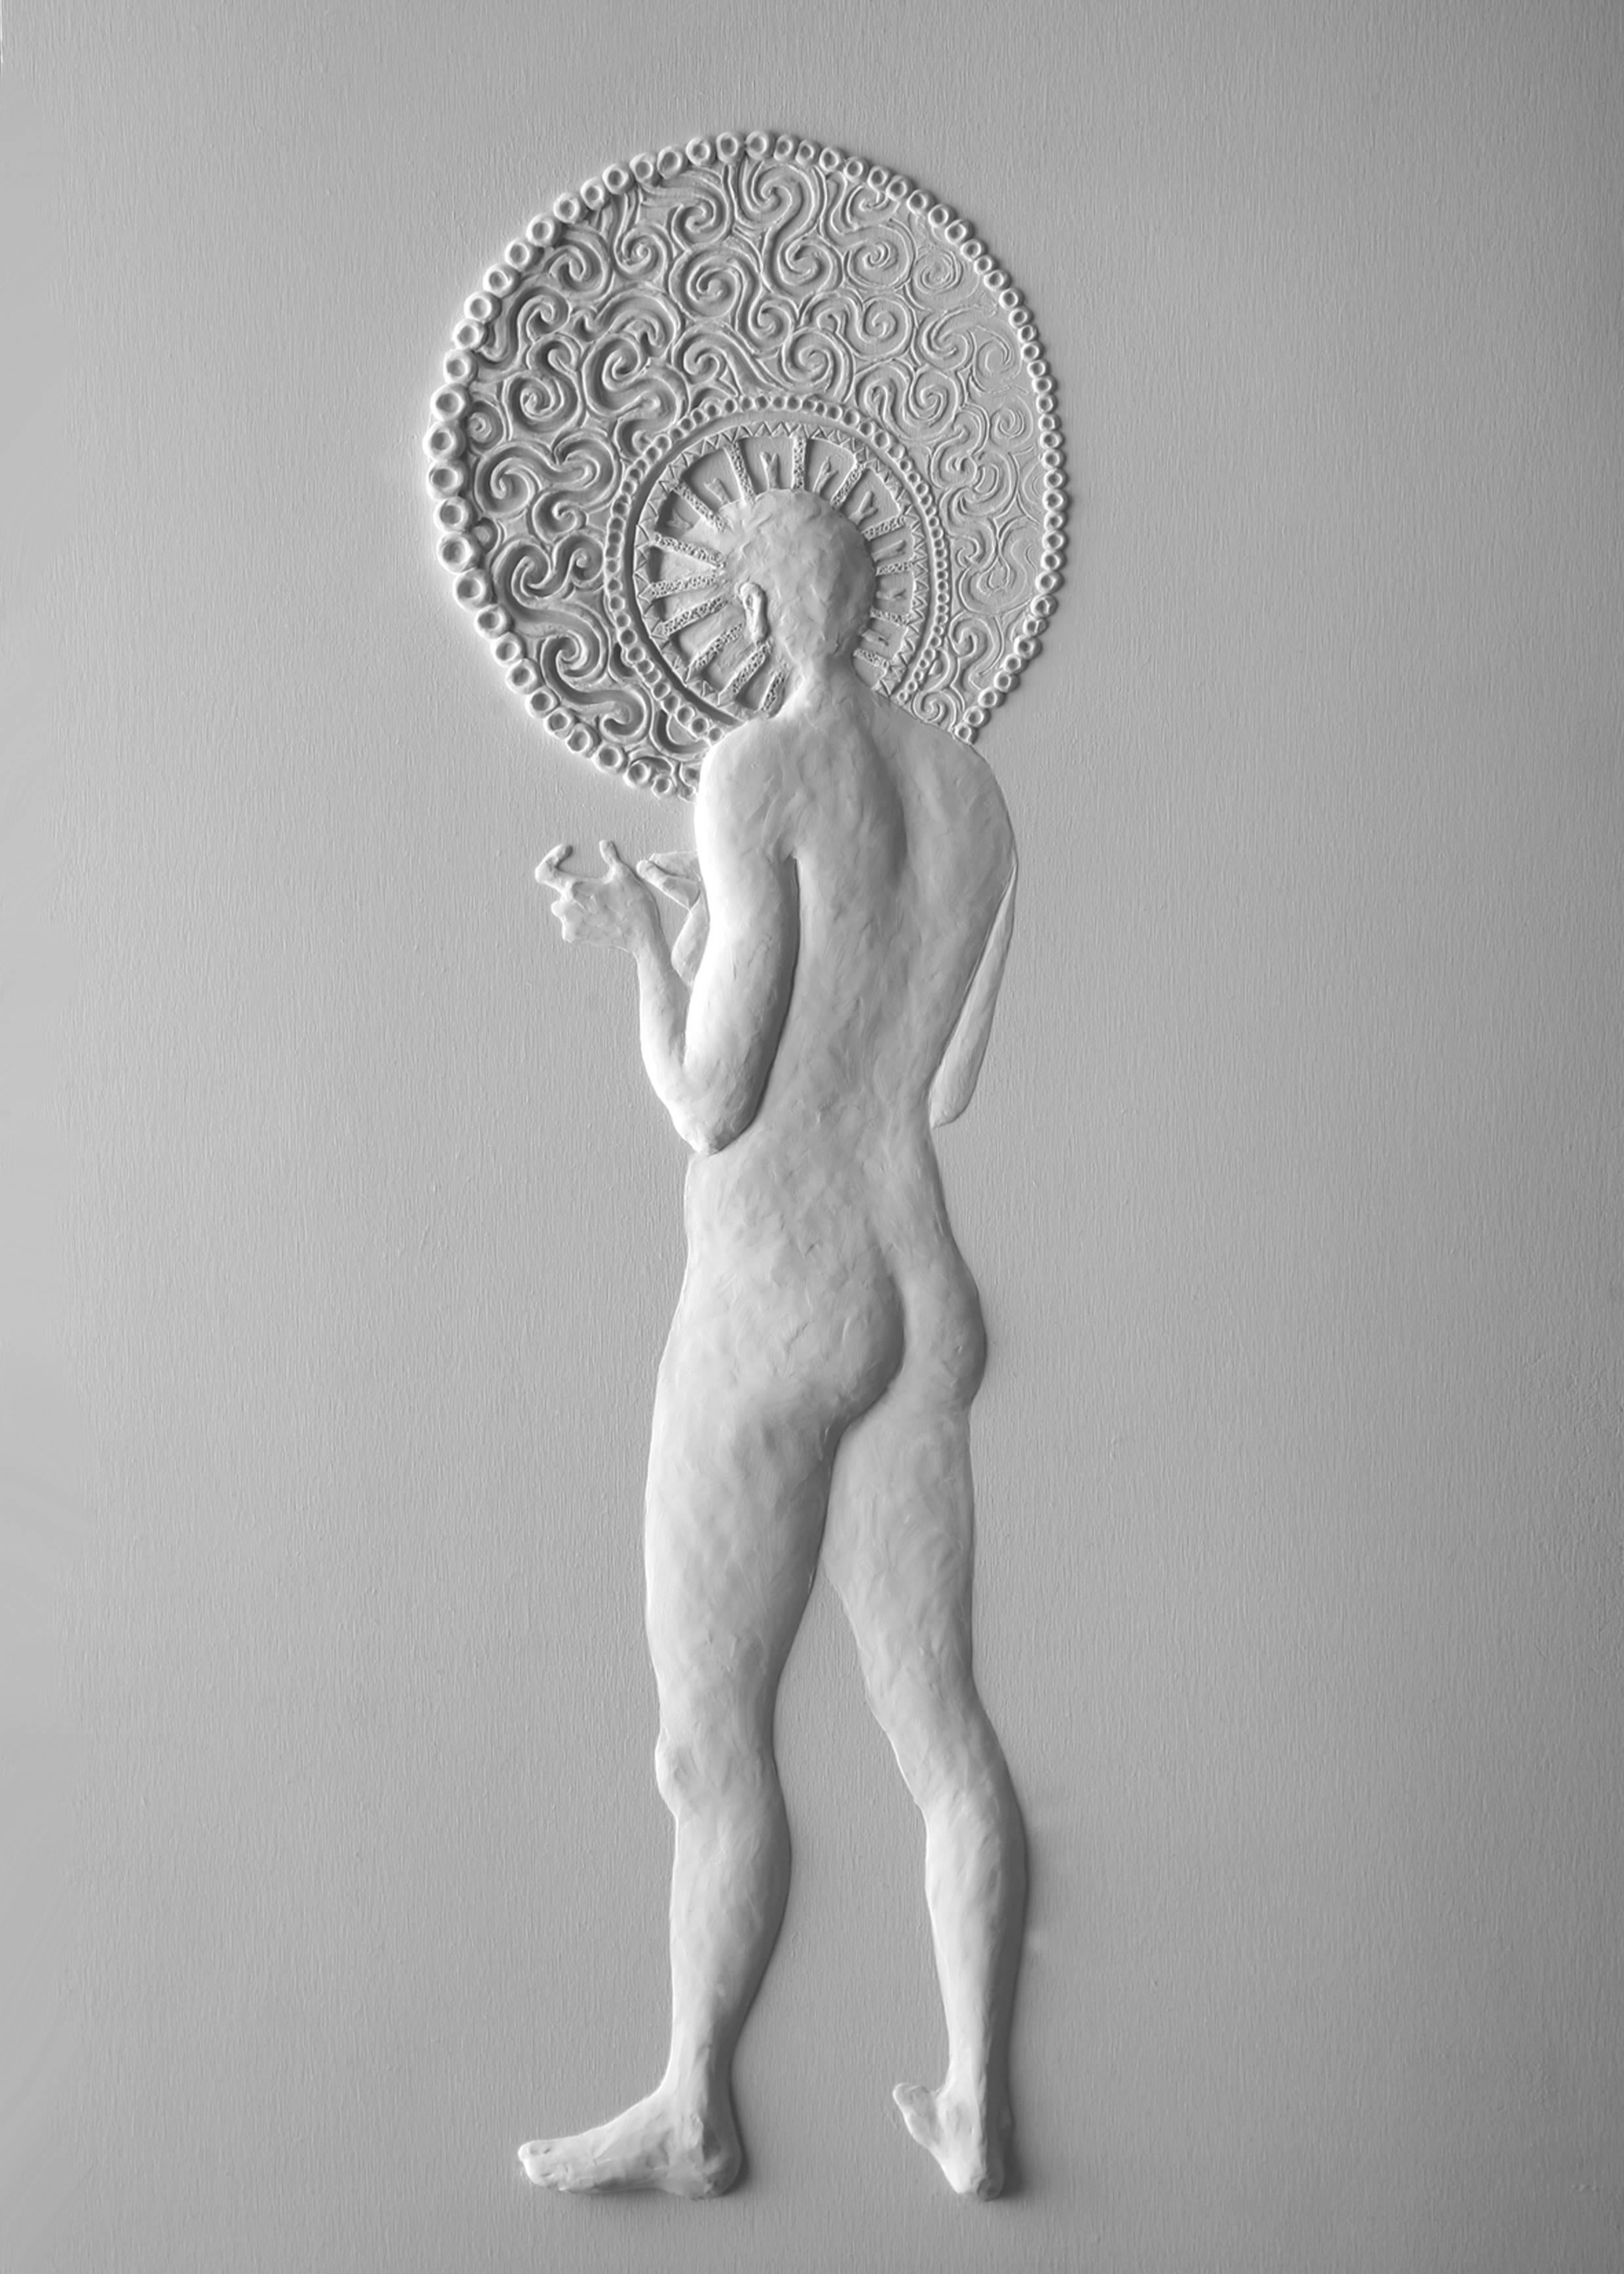 Maja Thommen Figurative Sculpture - "Aureole" Bas Relief Panel from the "Dressing" Series, 2011